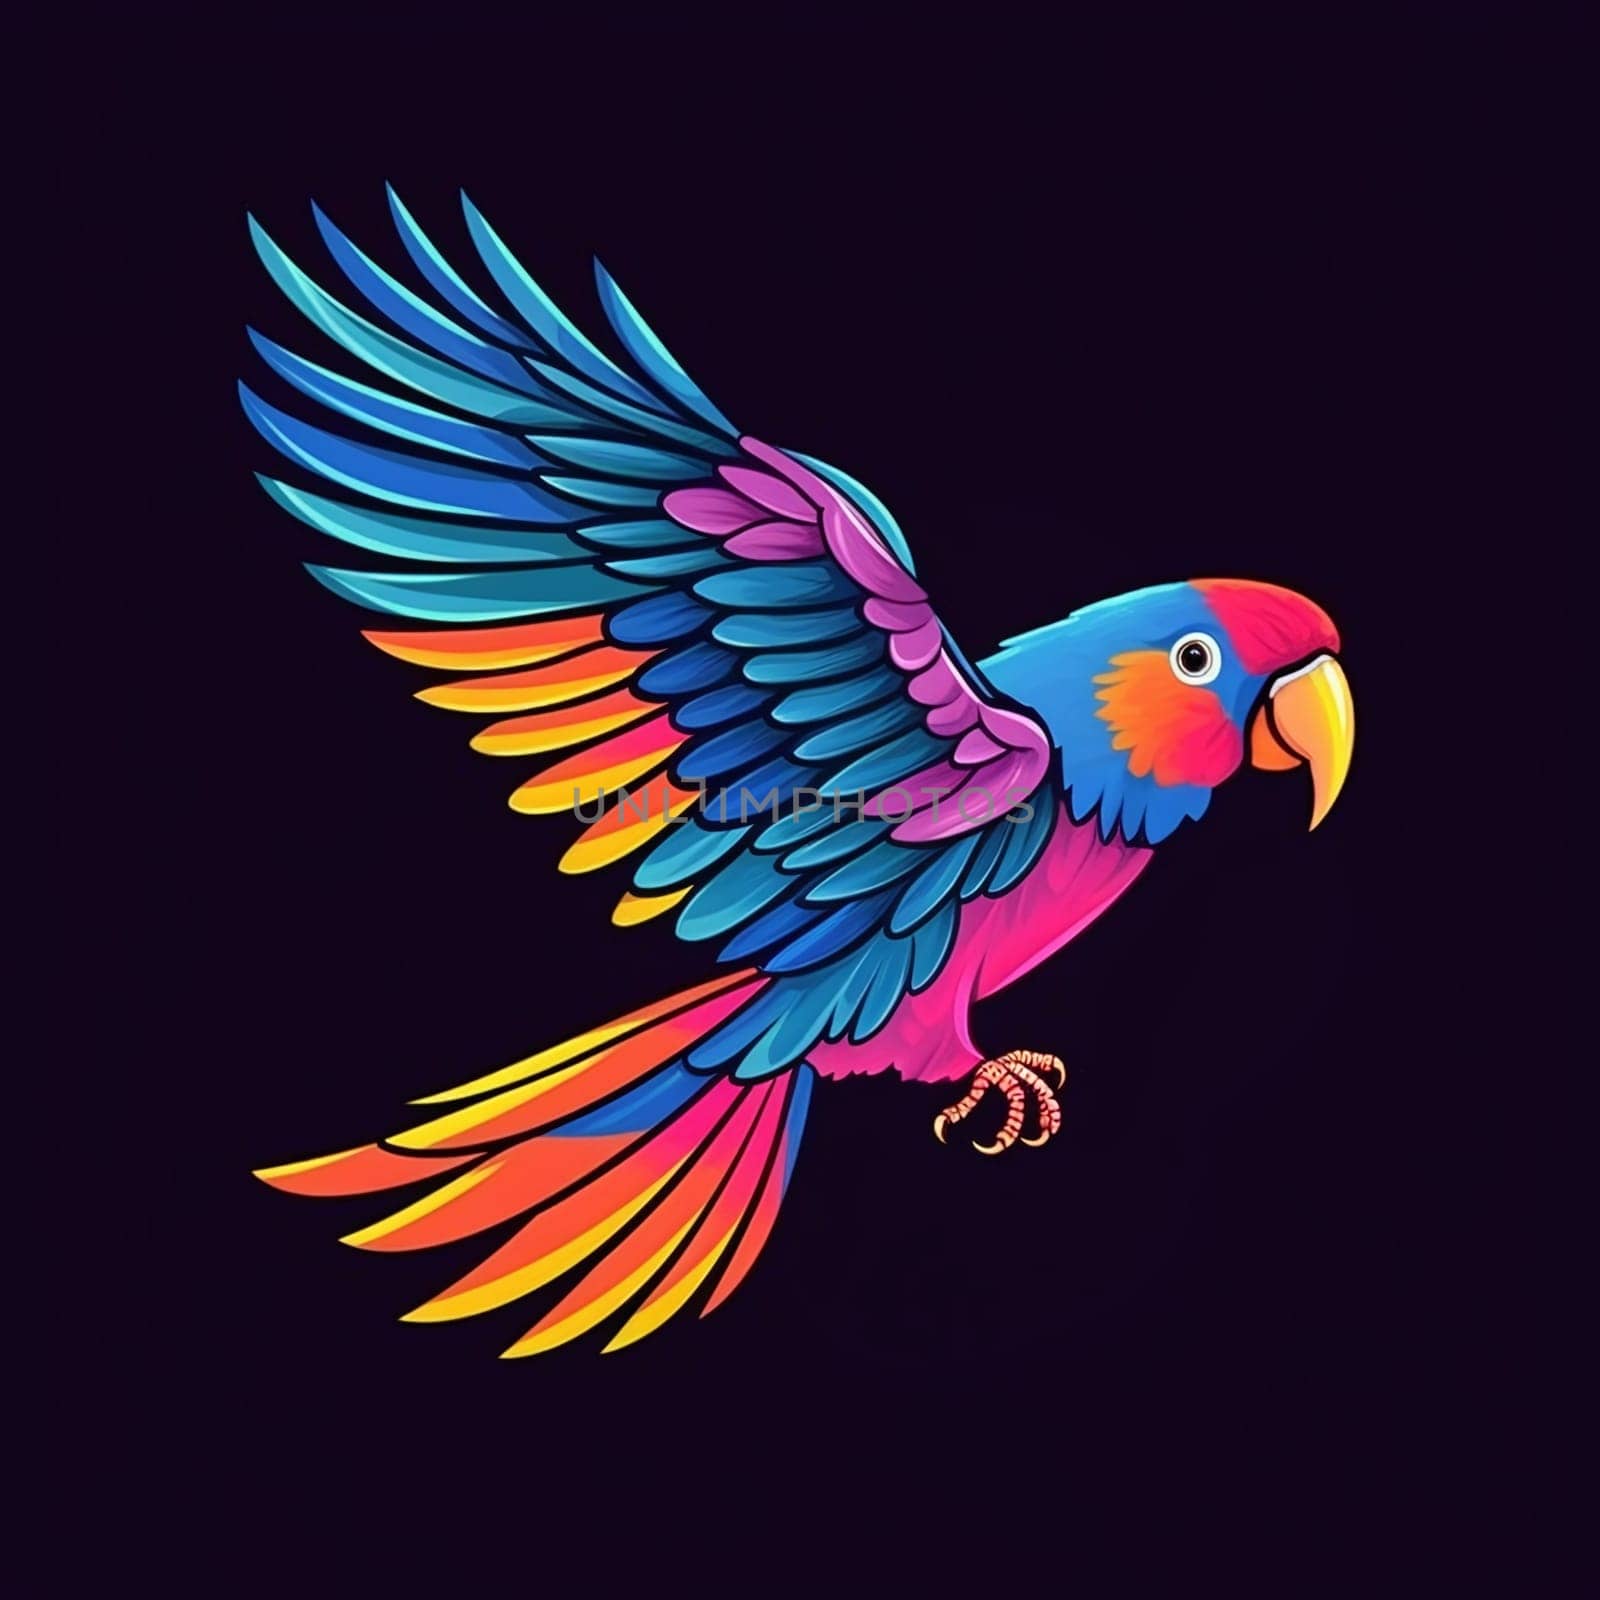 Vibrant Rainbow-Colored Parrot in Flight by chrisroll